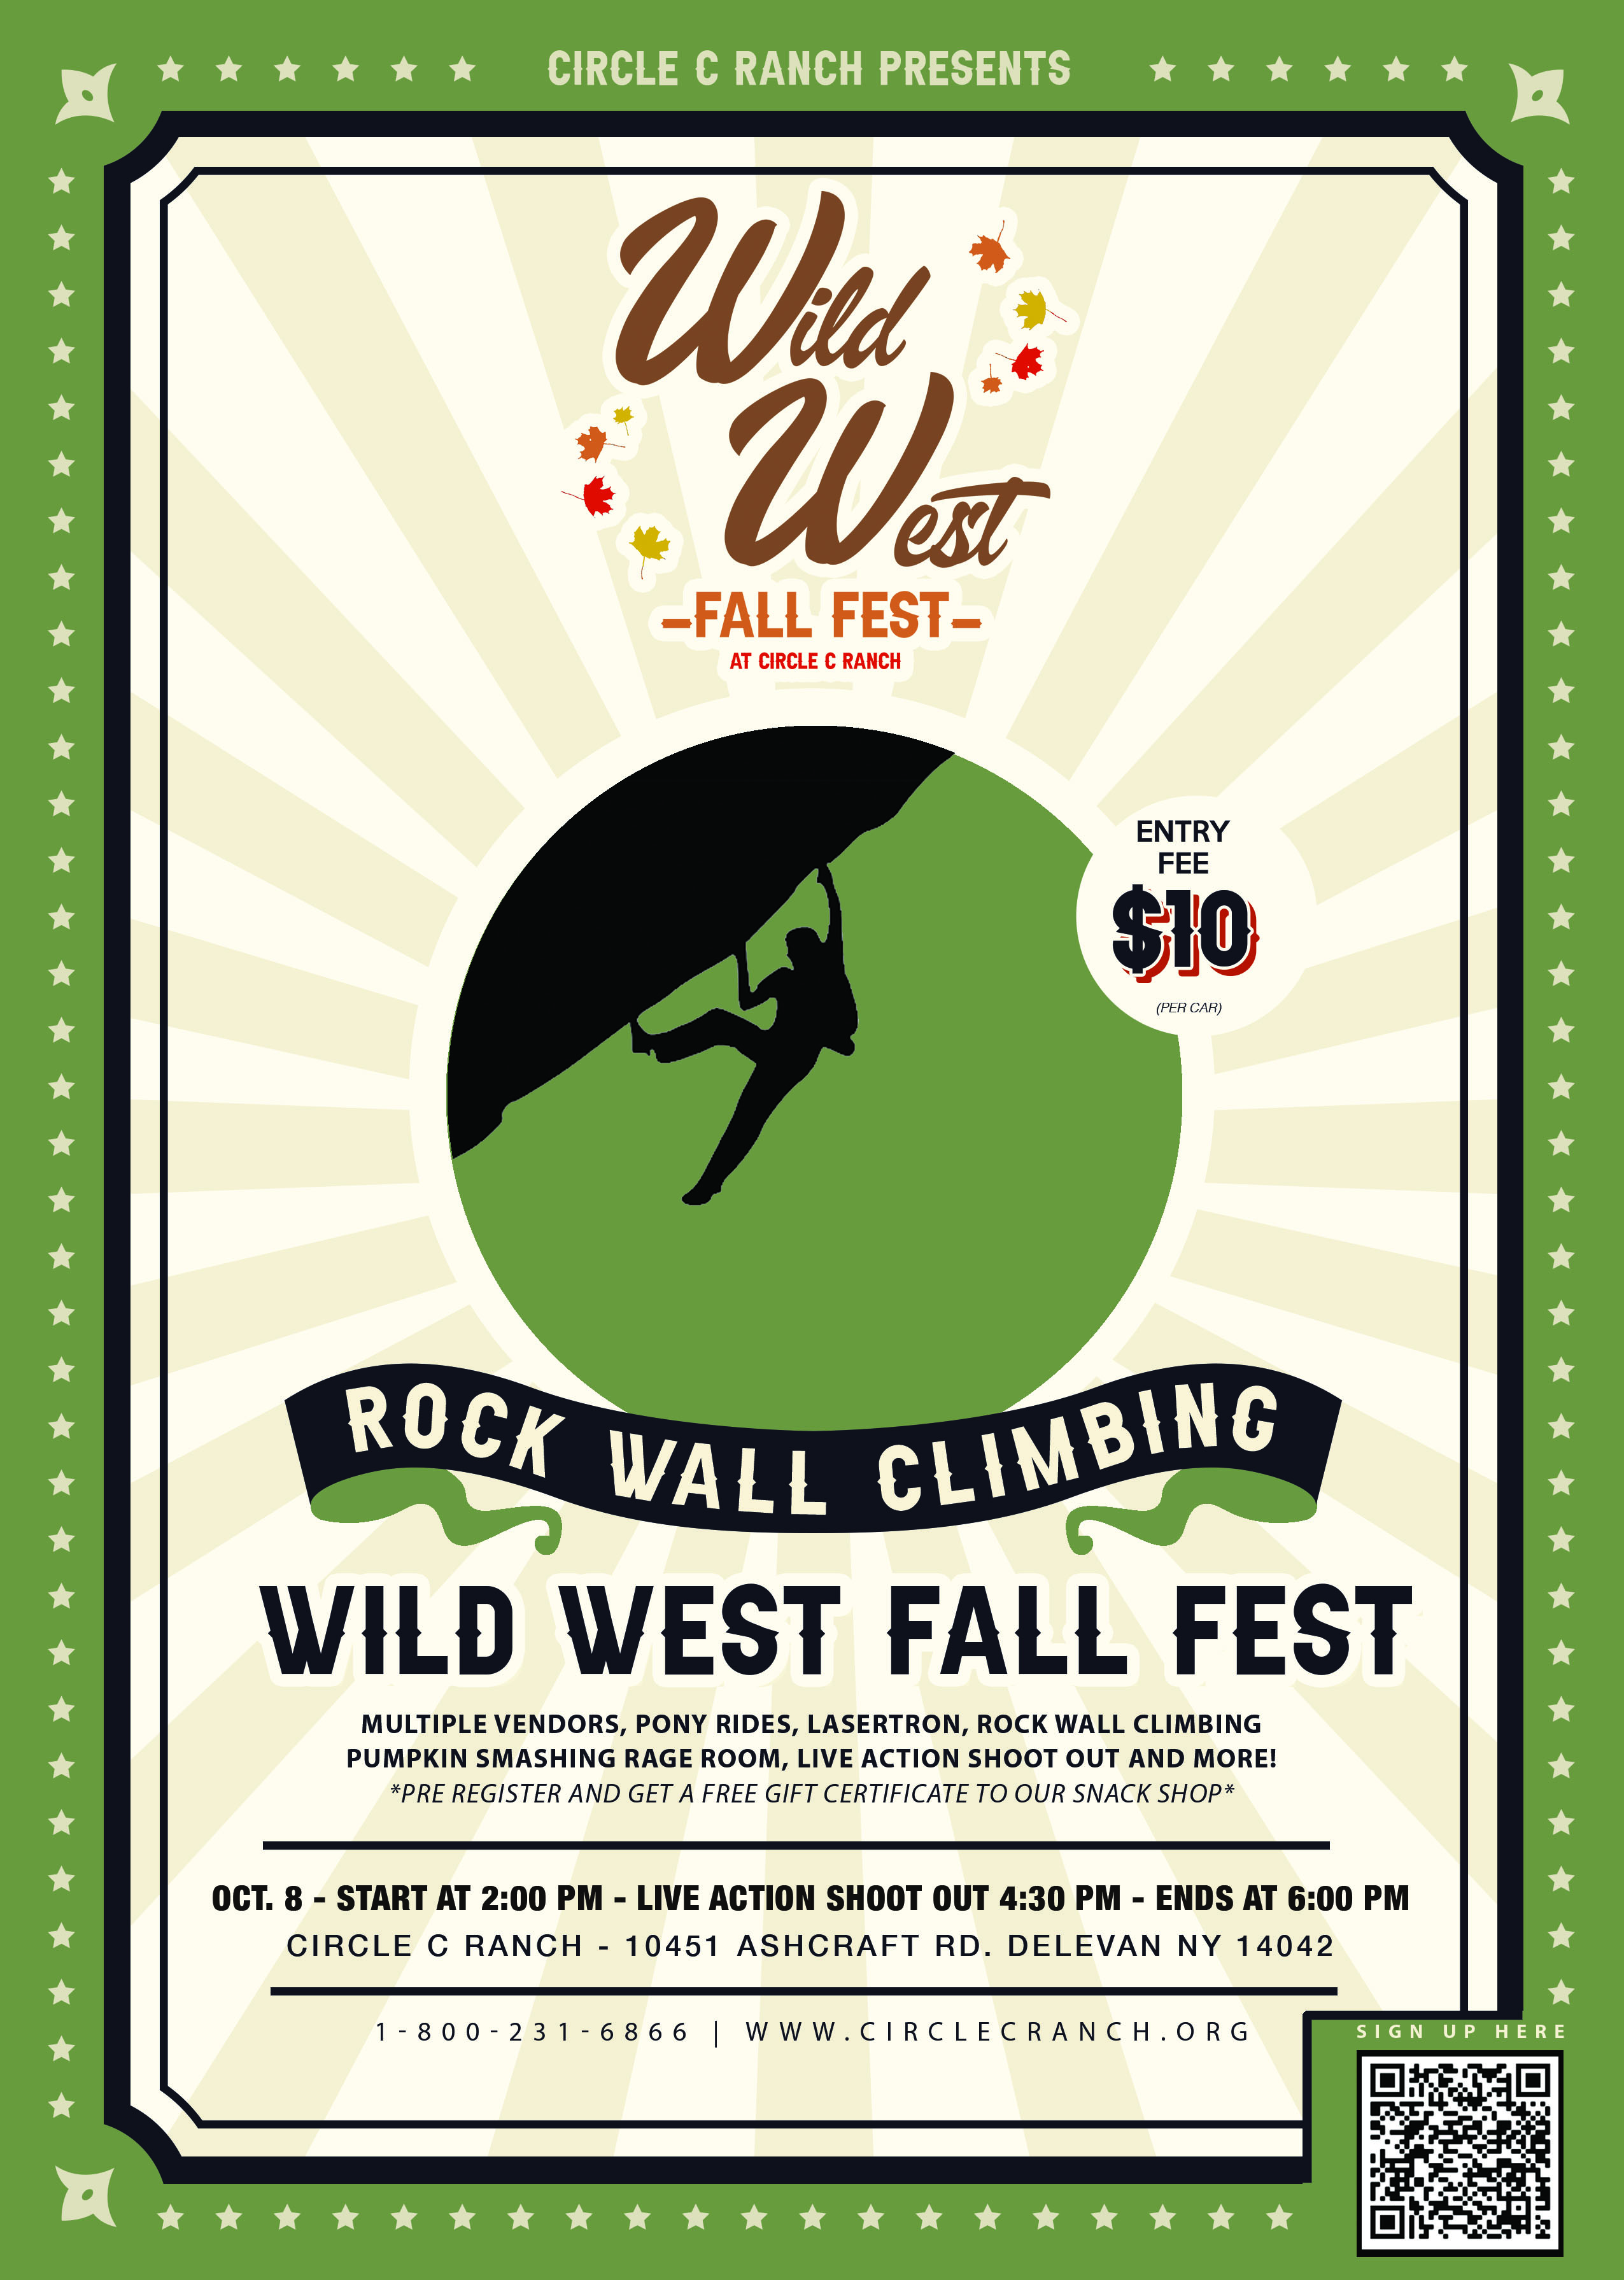 Flyers for Wild West Fall Fest 22Rock Wall Climbing